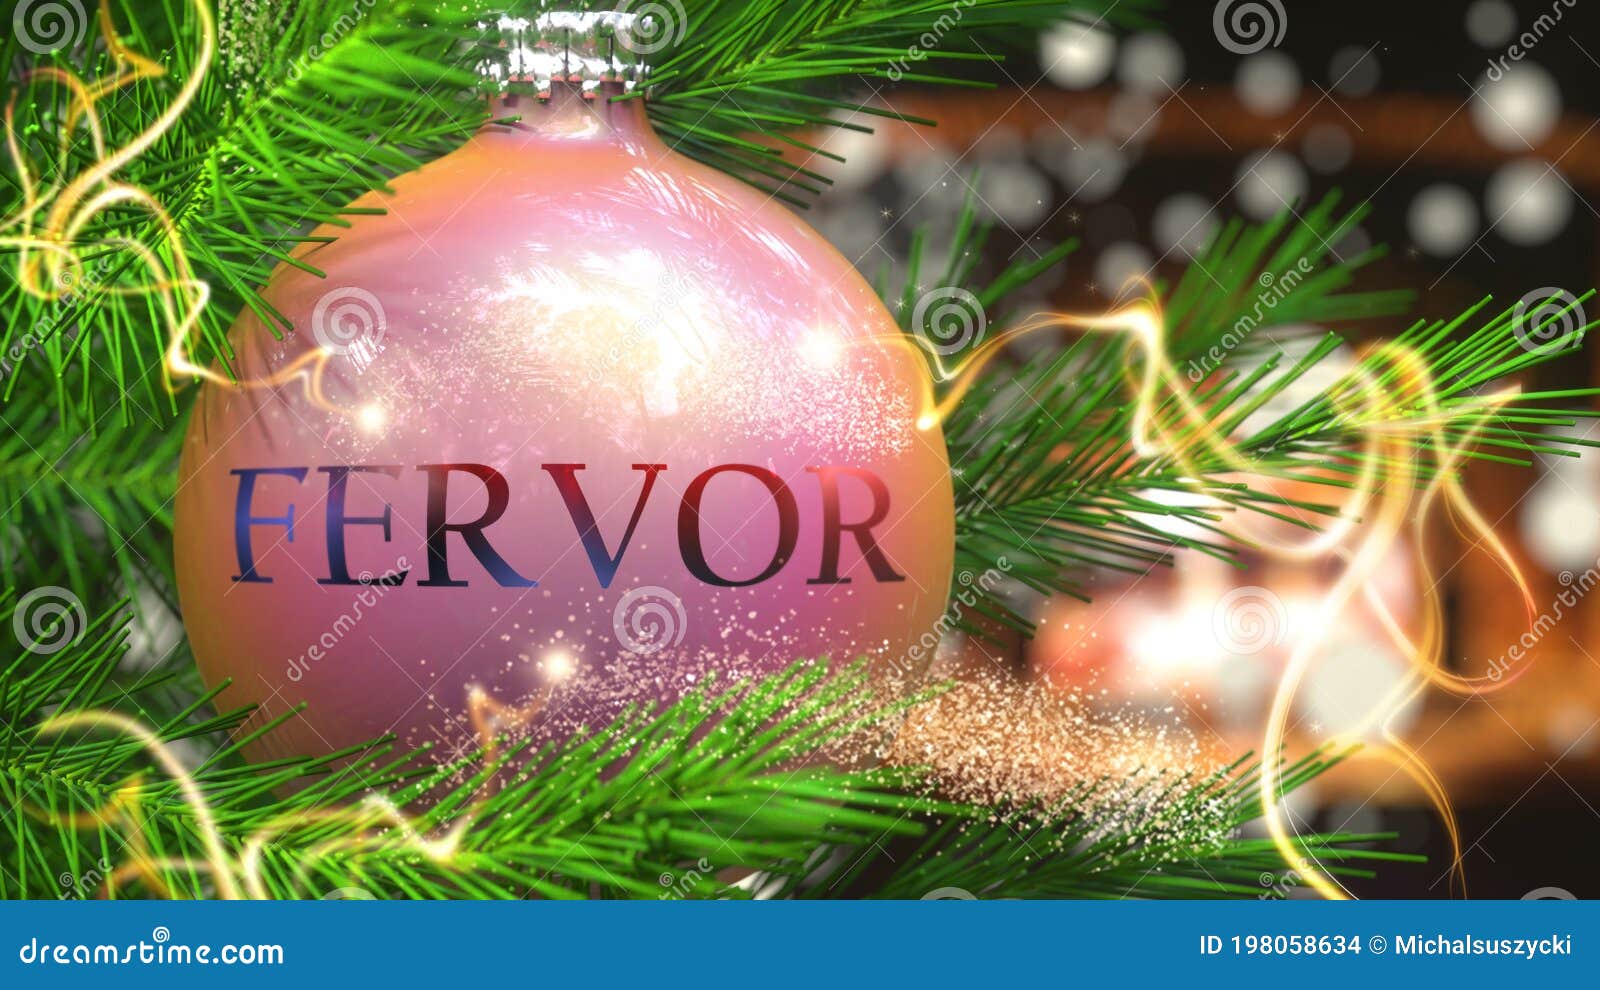 fervor and christmas holidays, pictured as a christmas ornament ball with word fervor and magic beams to ize the connection